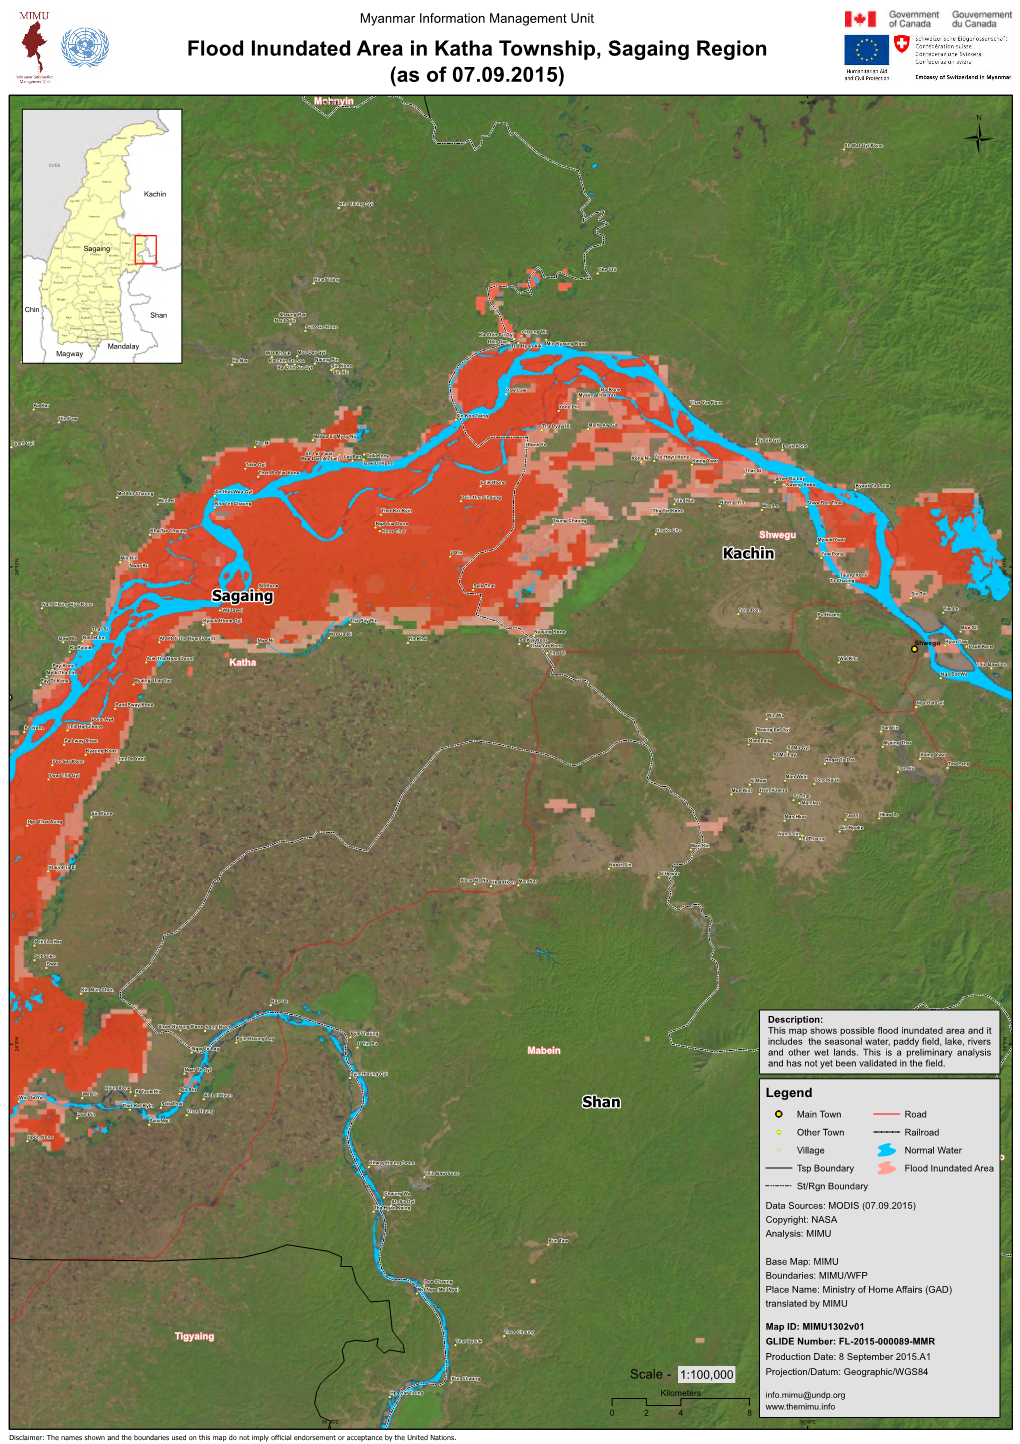 Flood Inundated Area in Katha Township, Sagaing Region (As of 07.09.2015)